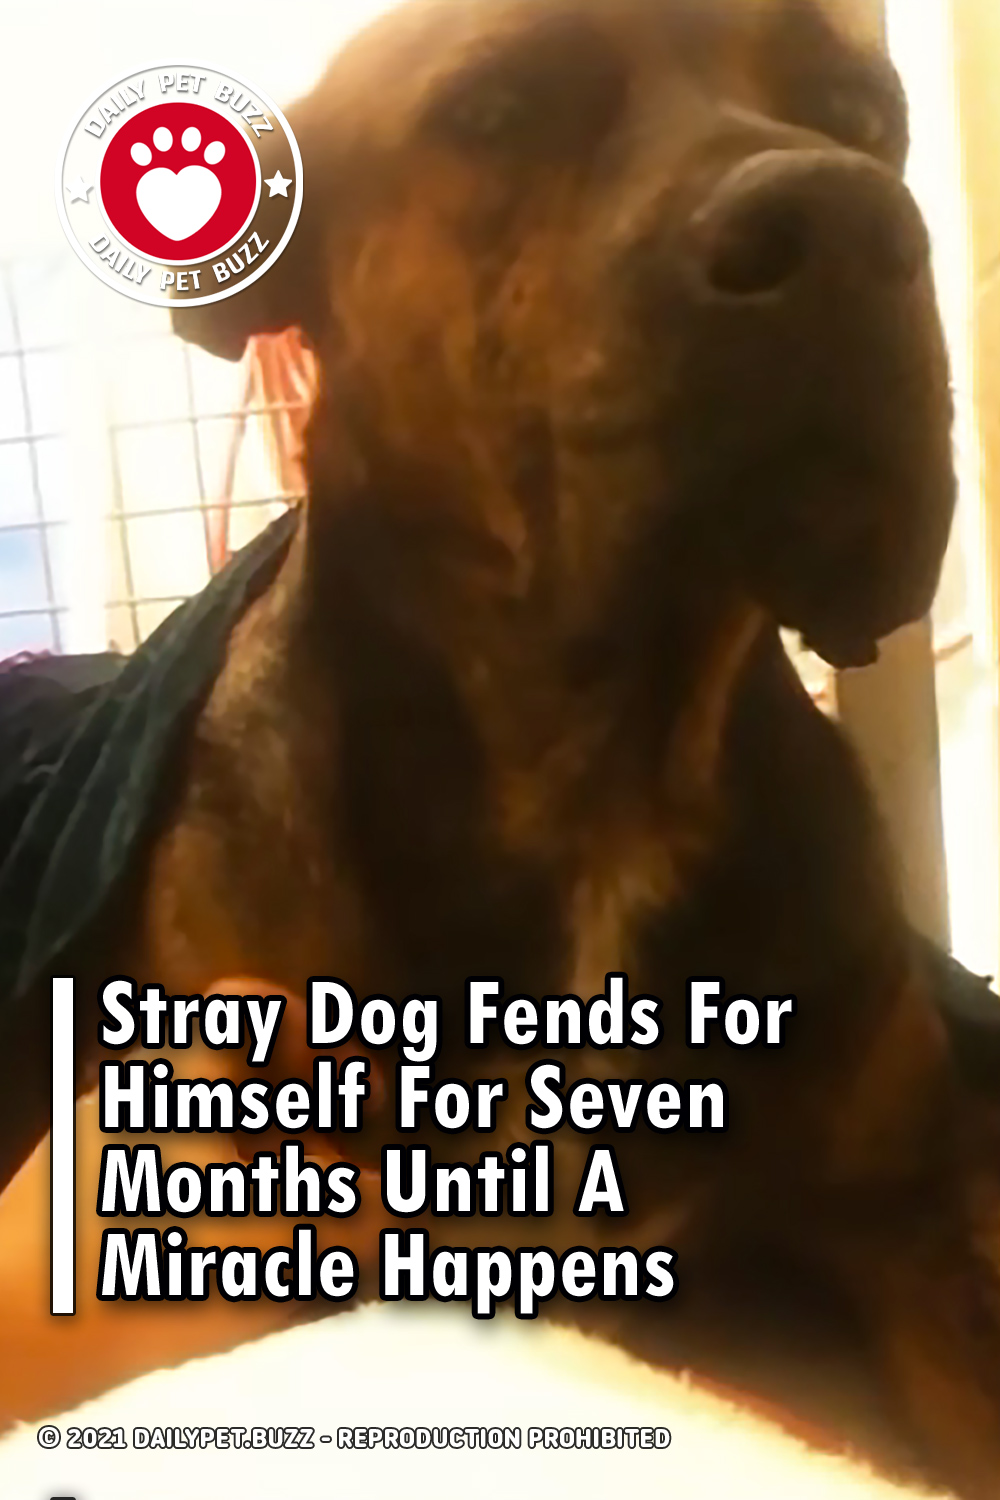 Stray Dog Fends For Himself For Seven Months Until A Miracle Happens